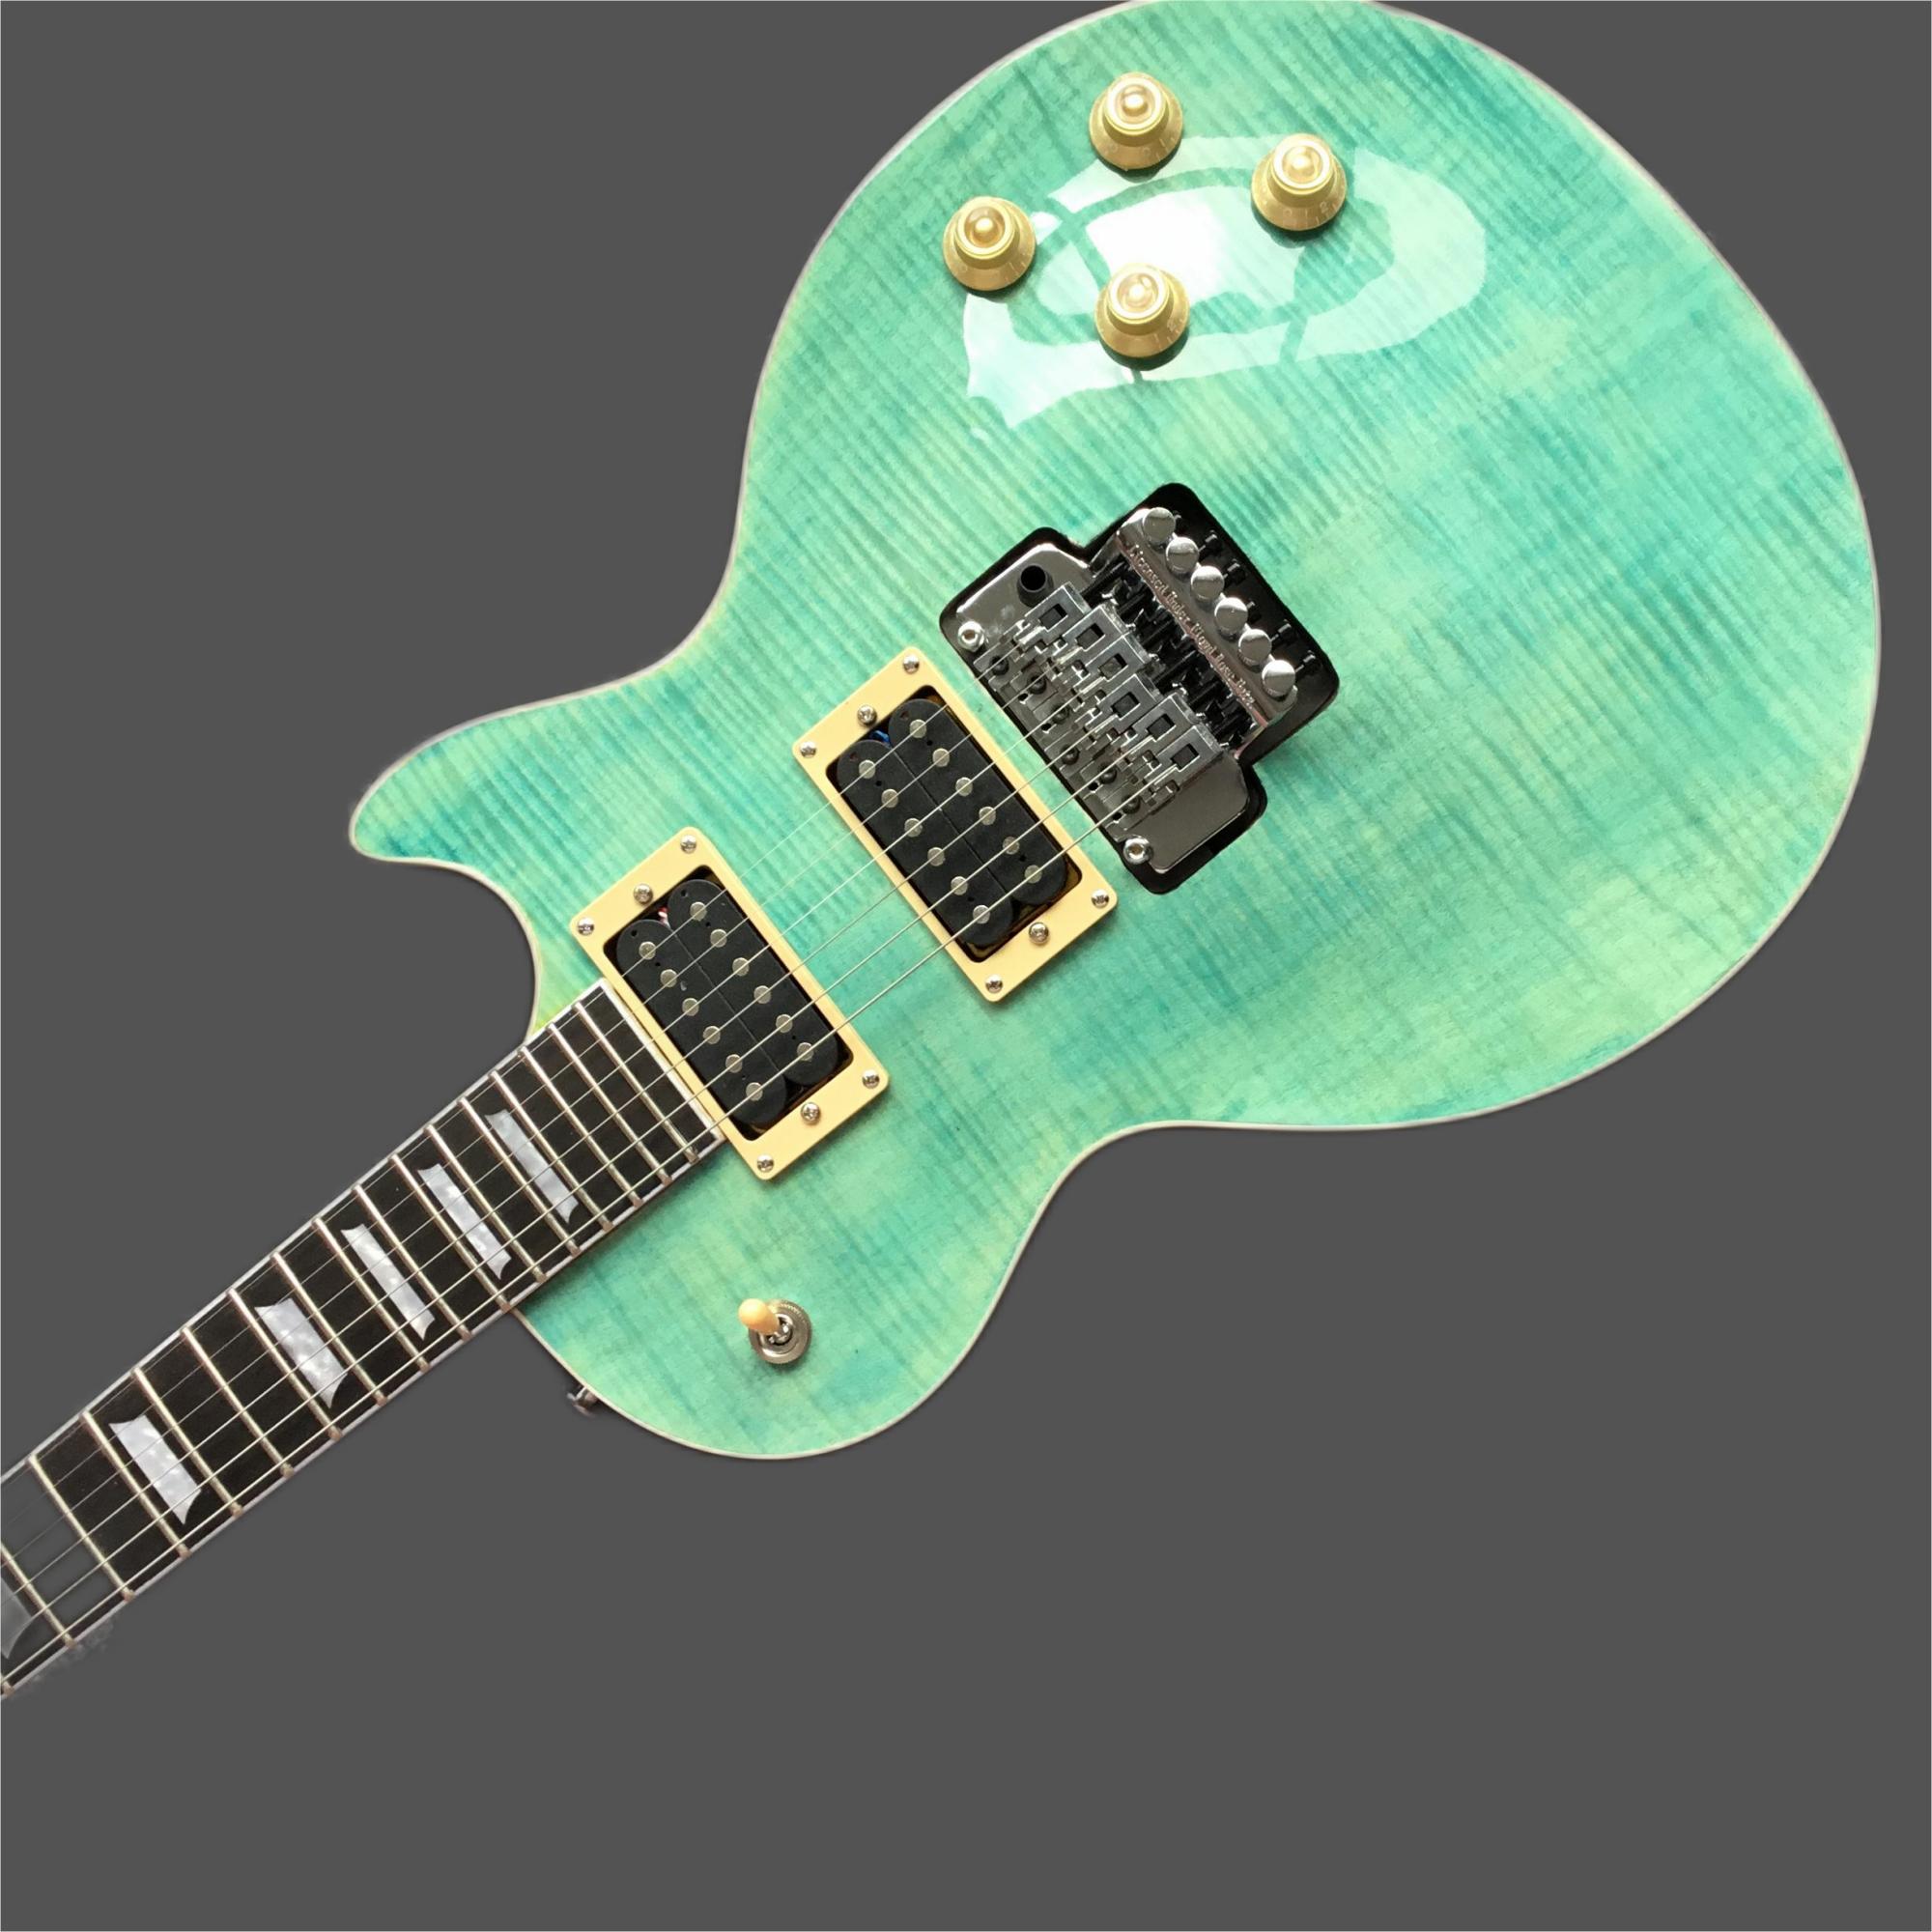 

LP Custom electric guitar vibrato, choice of colors, Flame maple top, free shipping for high quality instruments